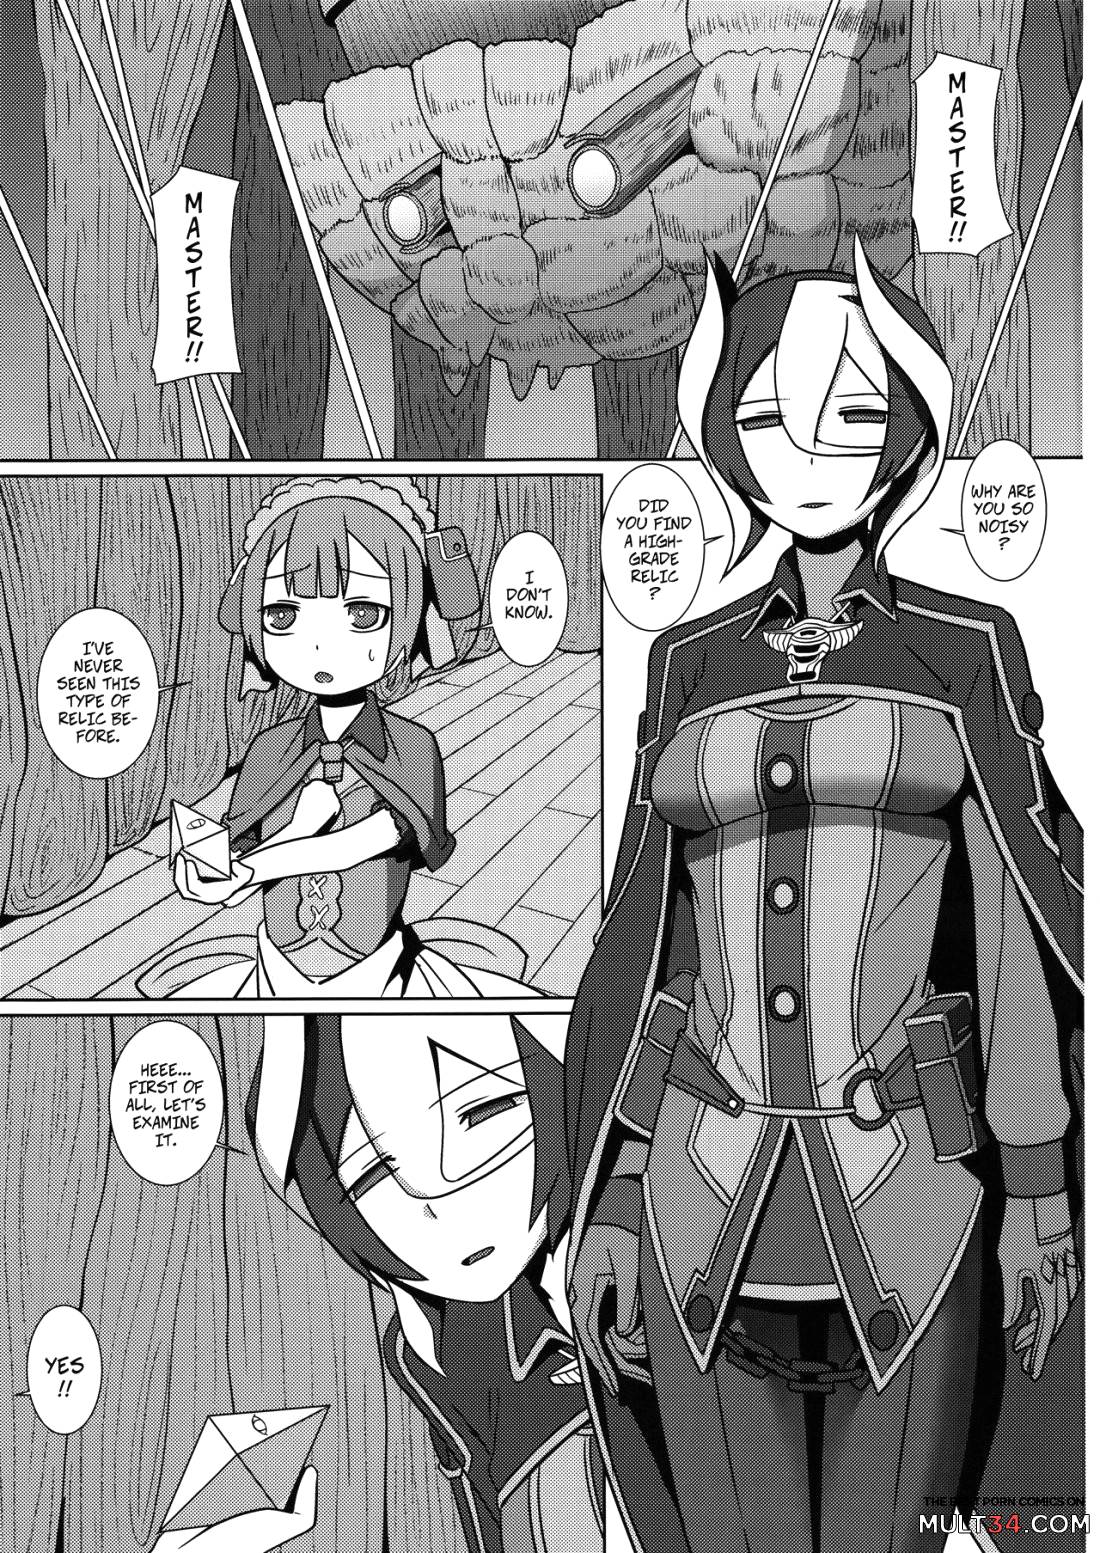 Made in abyss porn comic